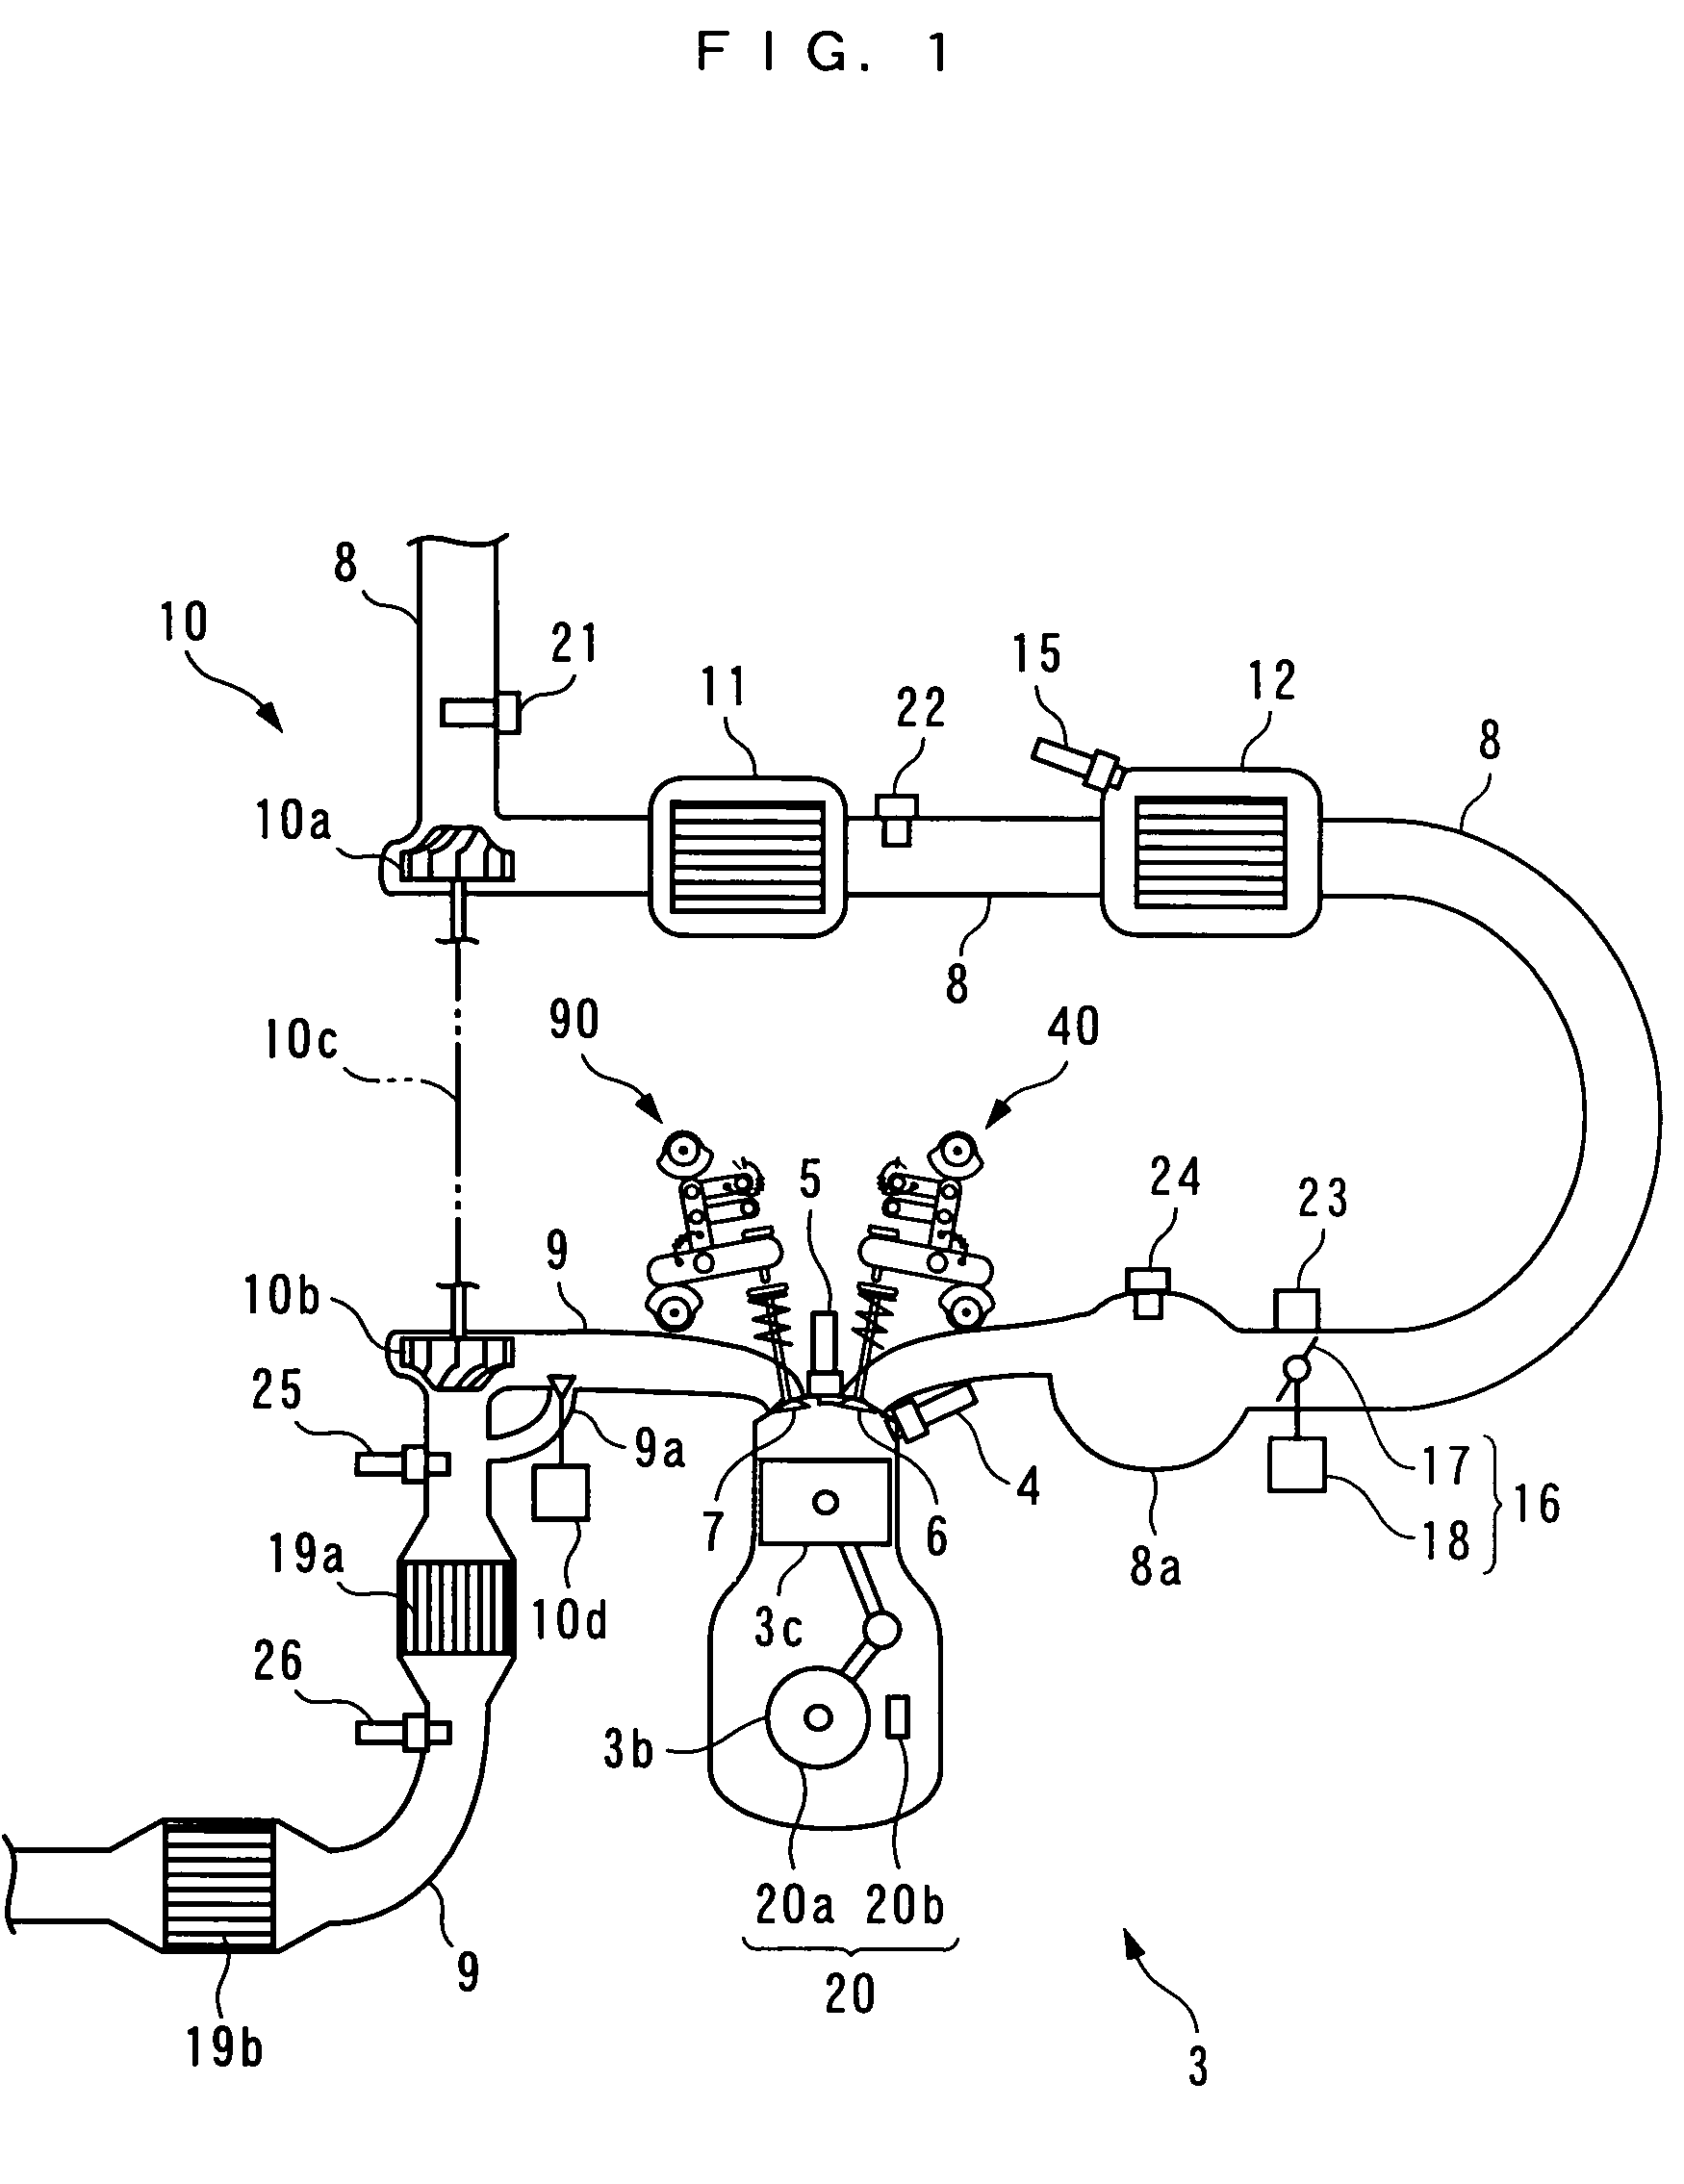 Intake air amount control system for internal combustion engine and control system